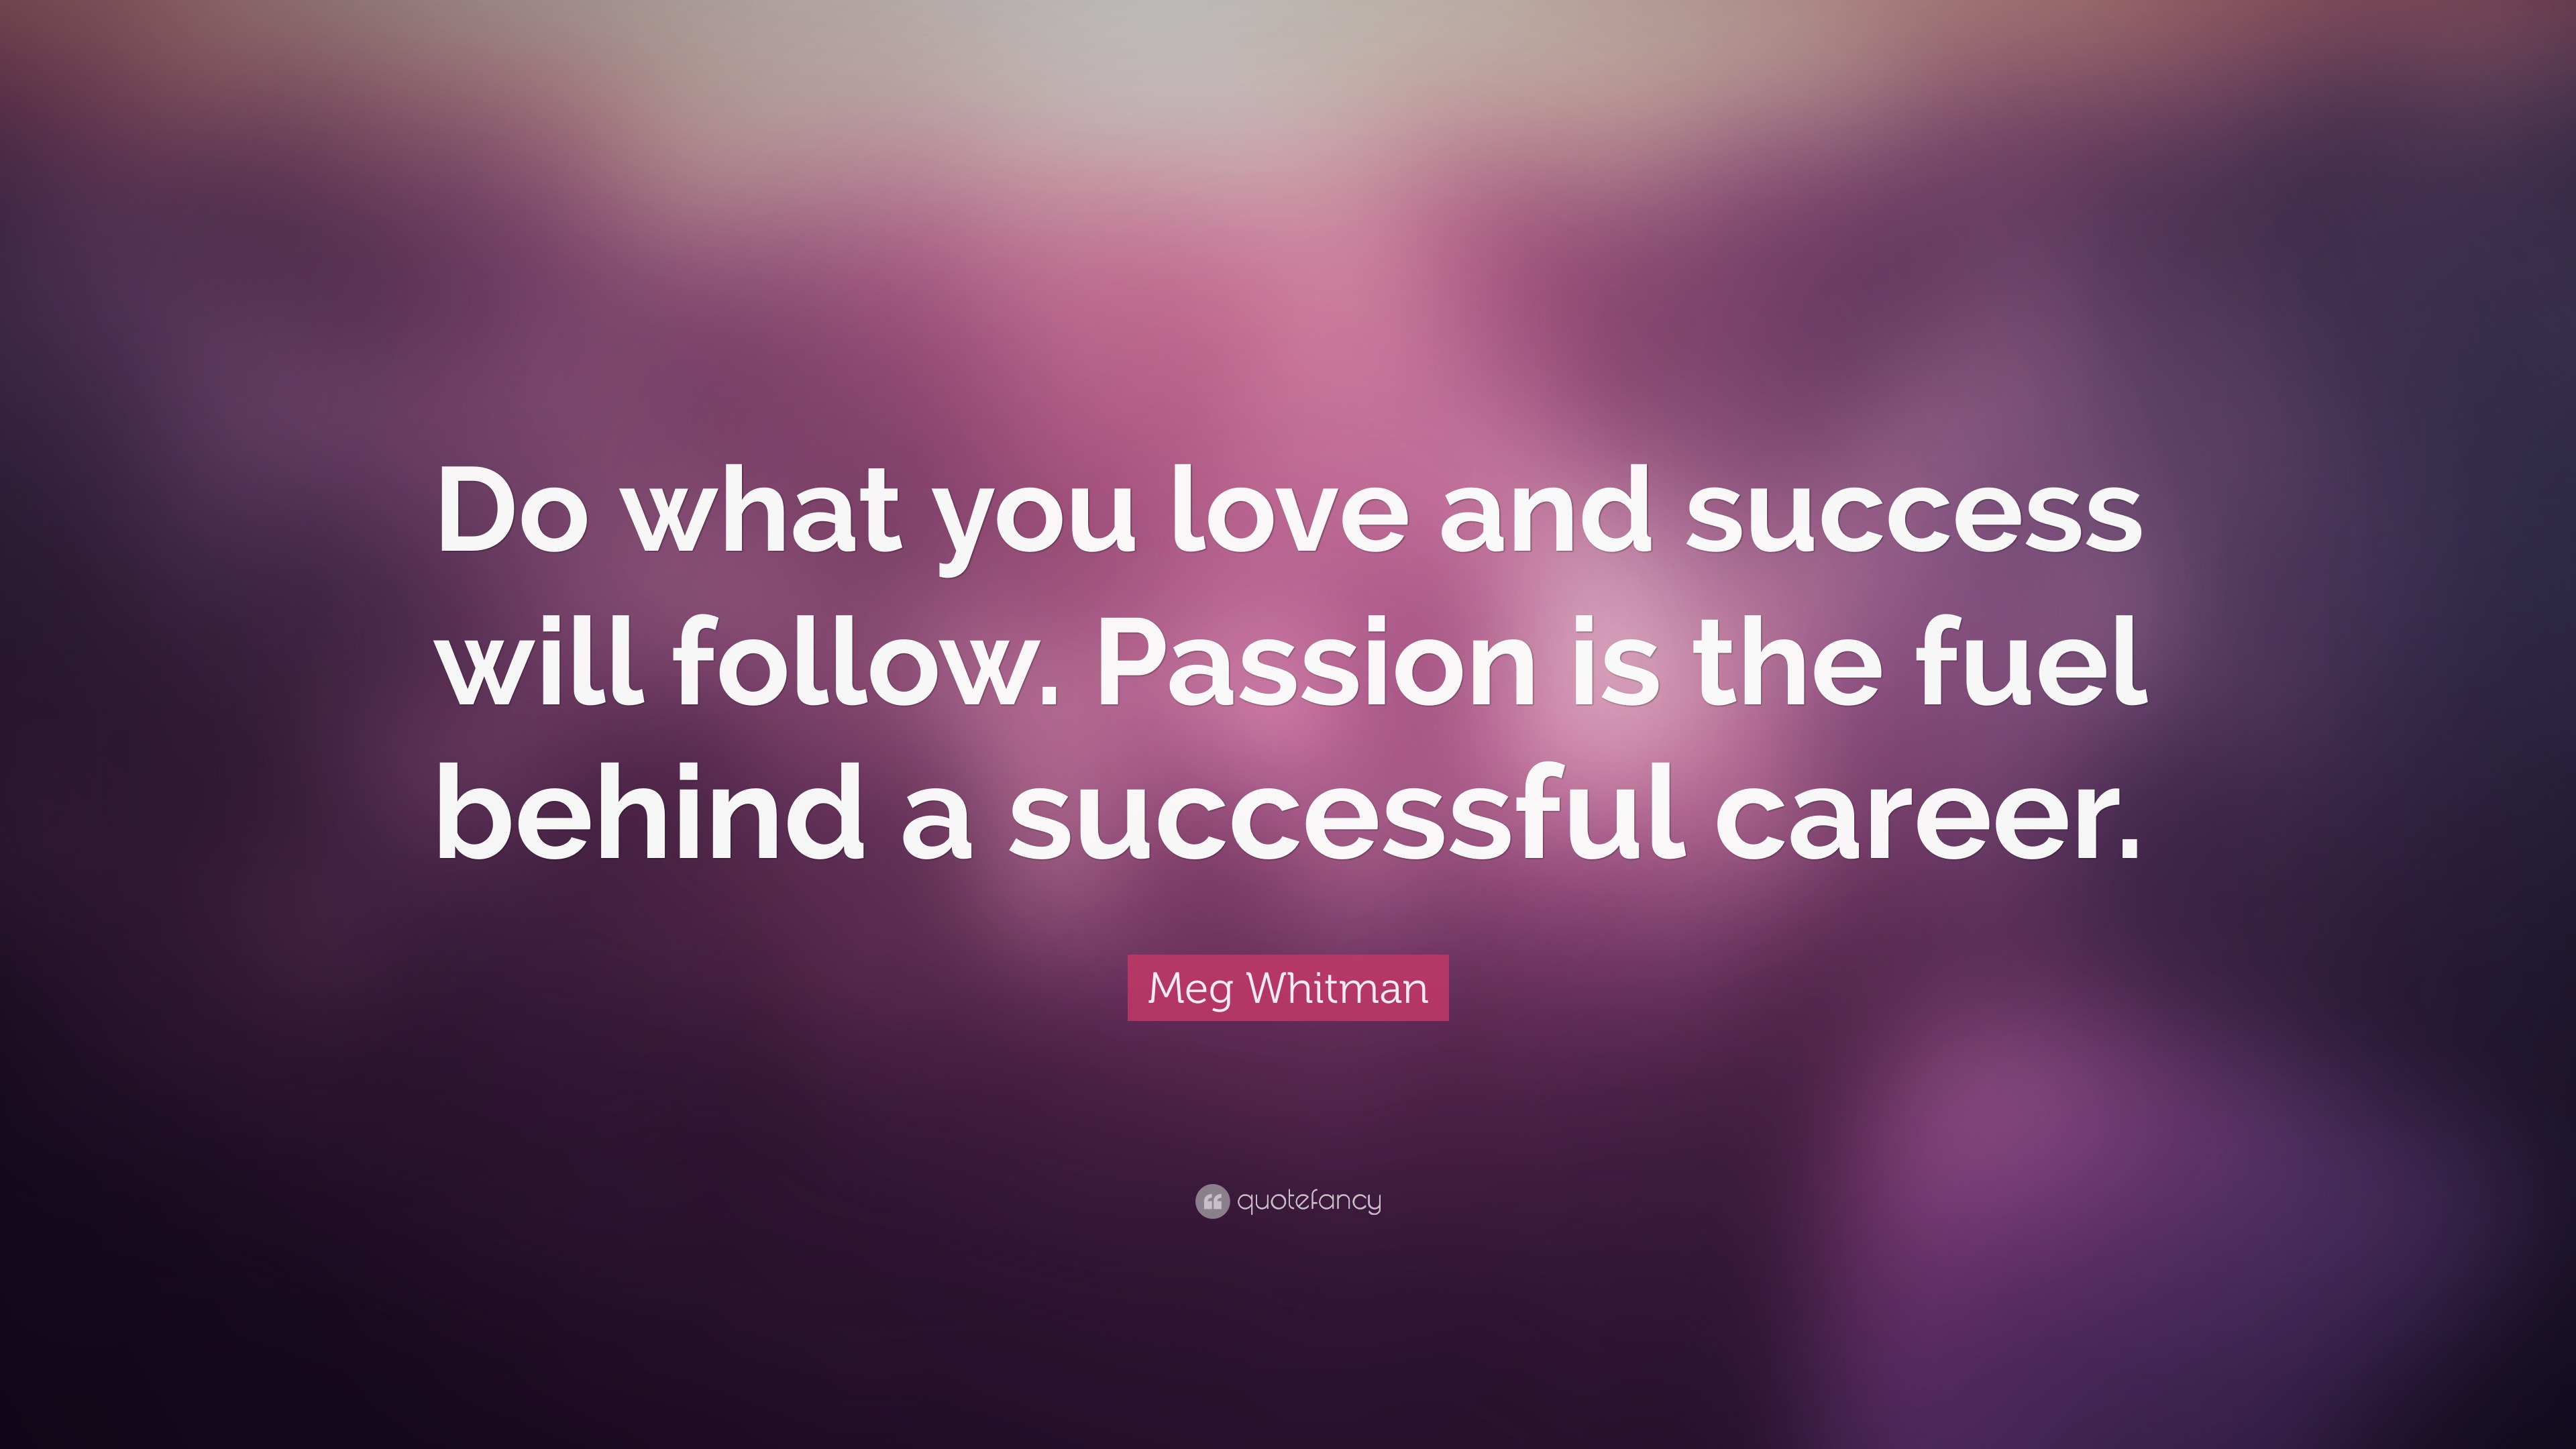 Meg Whitman Quote “do What You Love And Success Will Follow Passion Is The Fuel Behind A